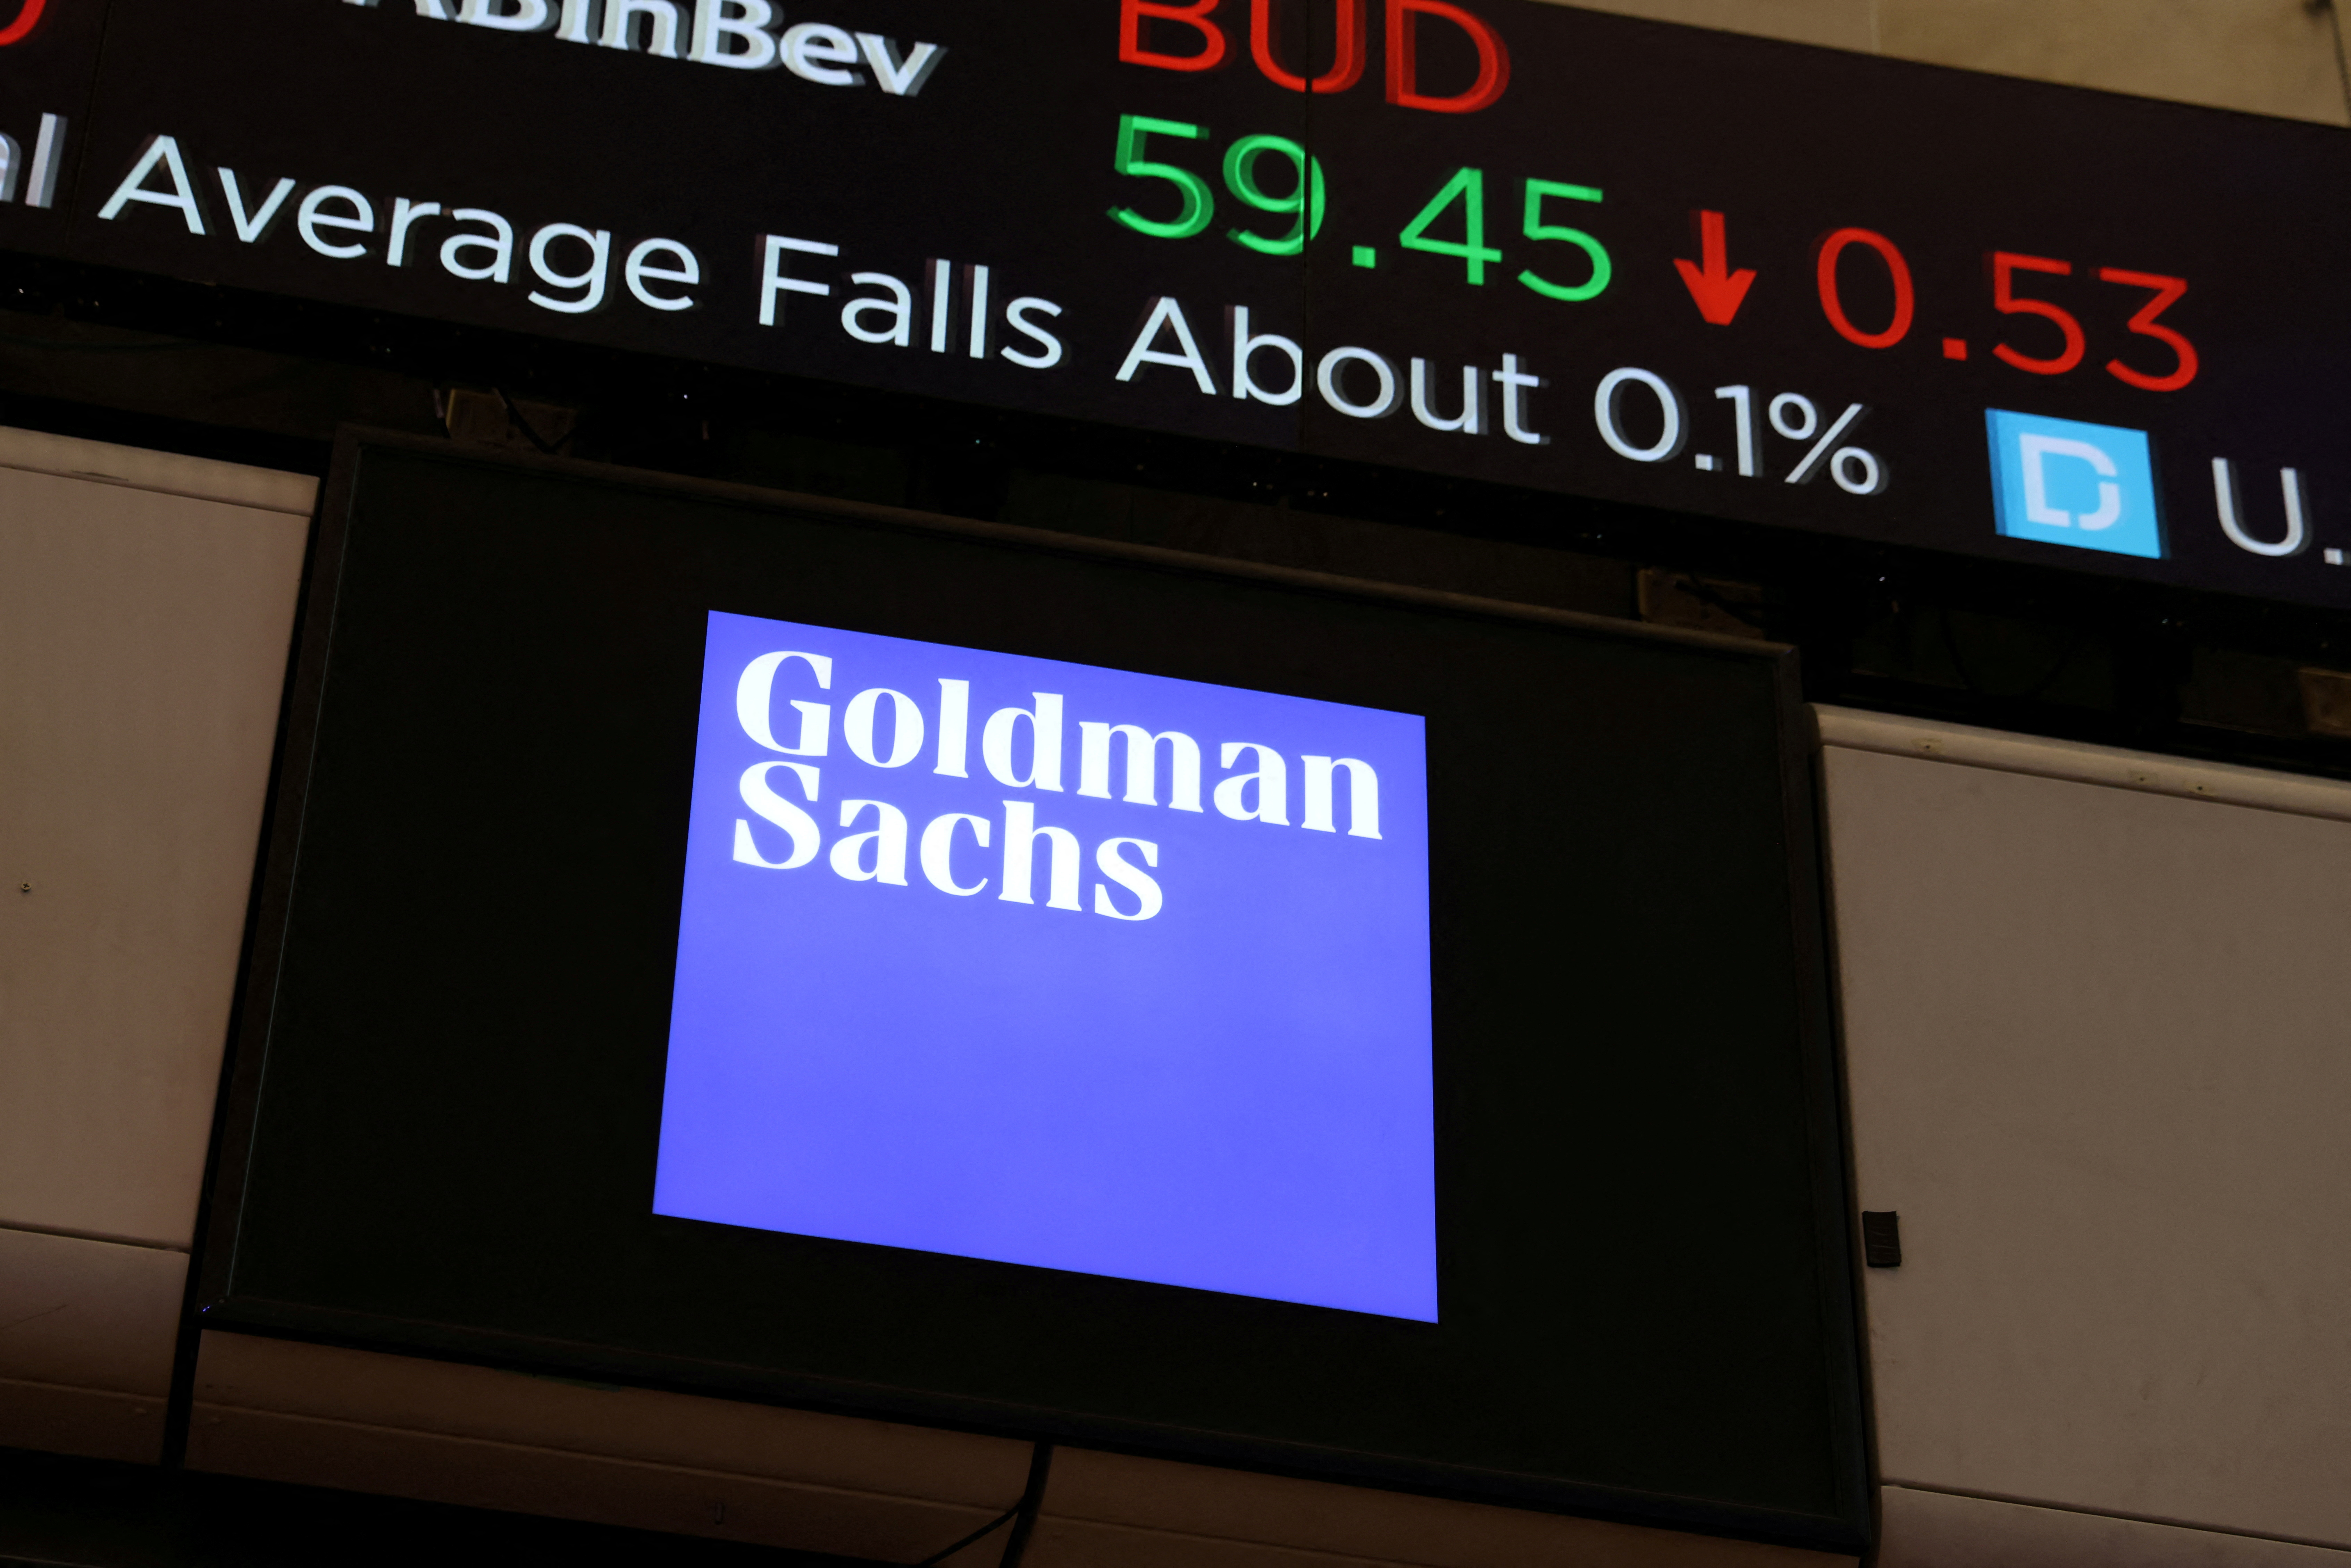 The symbol for Goldman Sachs is seen on the trading floor of the New York Stock Exchange (NYSE) in New York City.